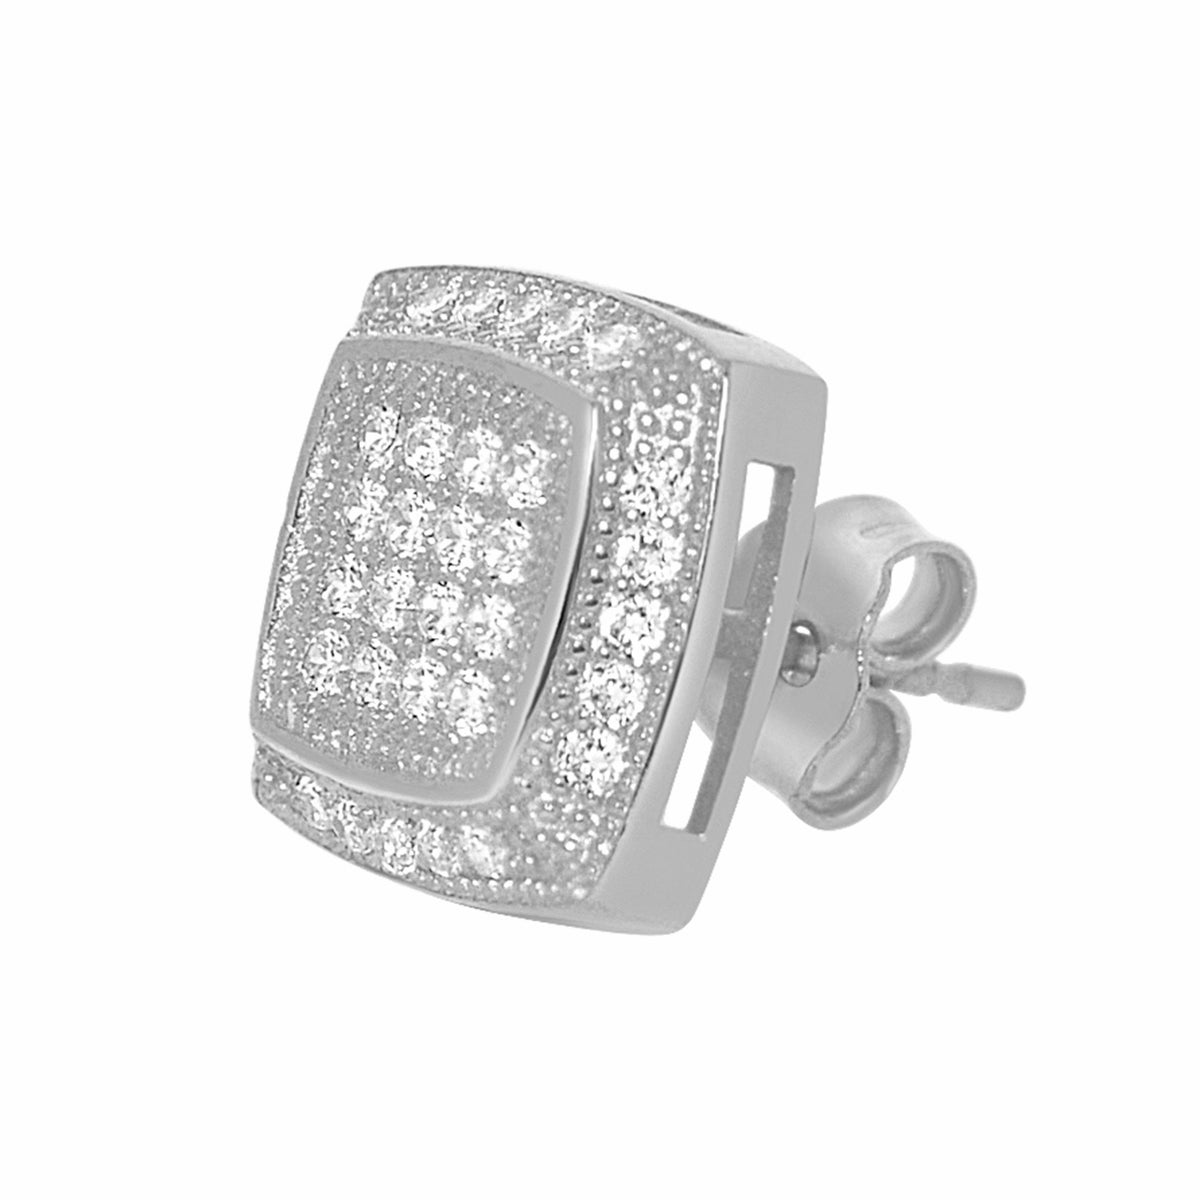 14k White Gold 10mm Pave'-set Cubic Zirconia Square Stud Earrings